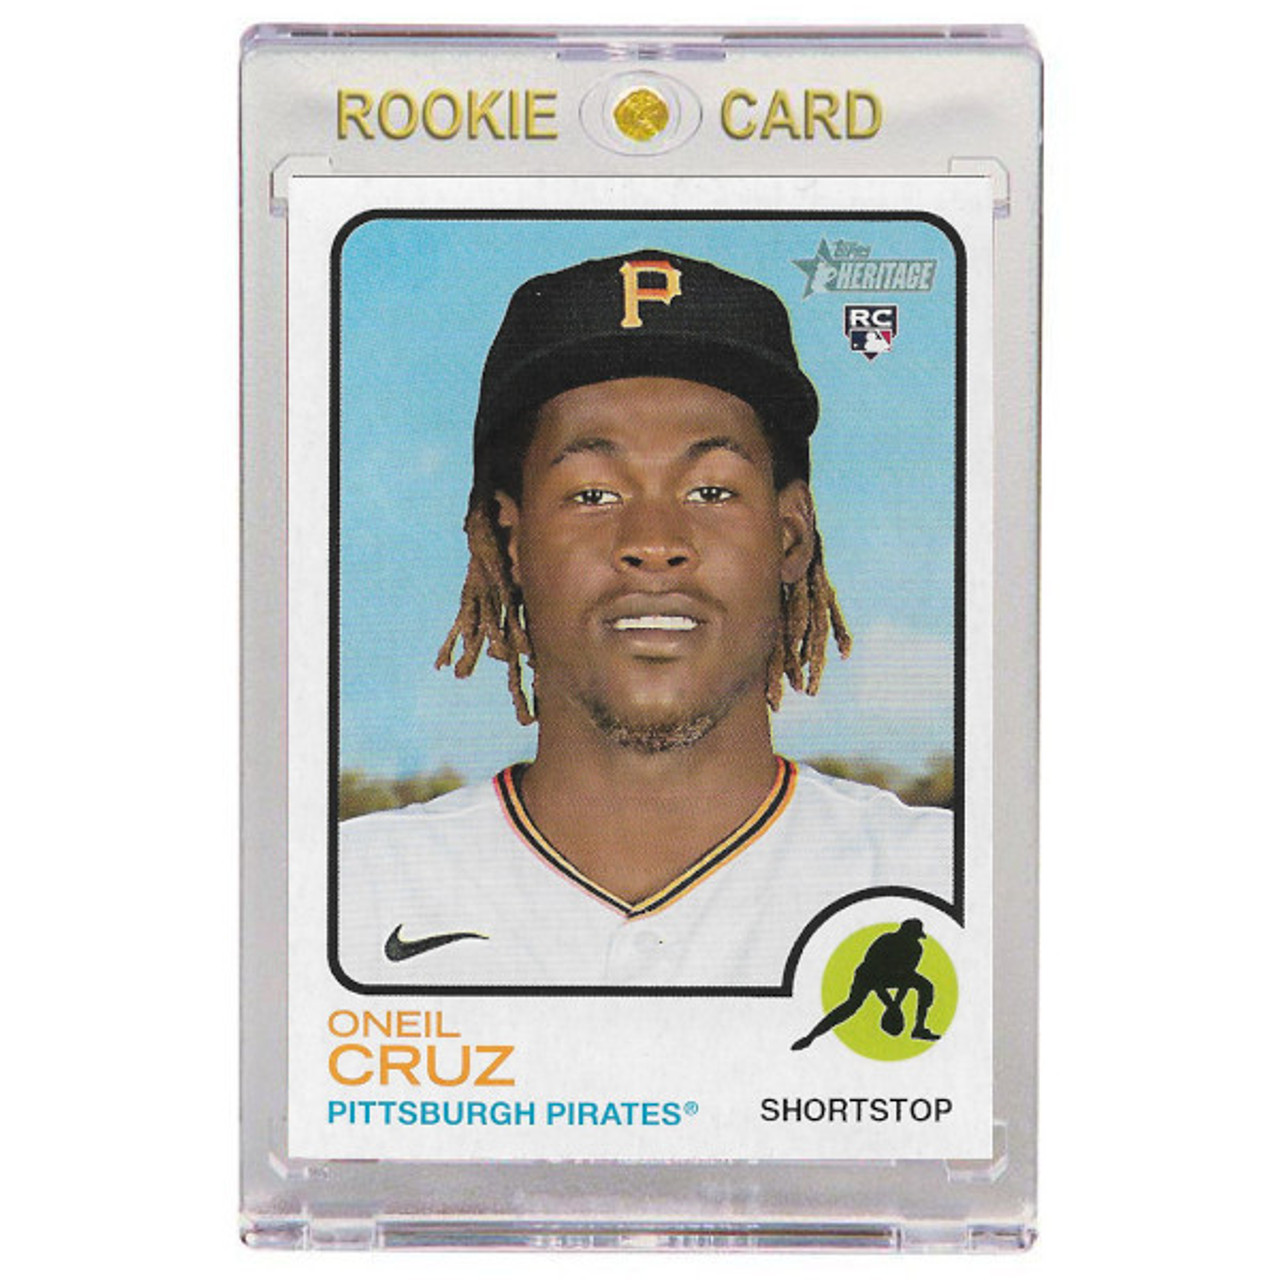 Oneil Cruz was named after Paul - Pittsburgh Pirates